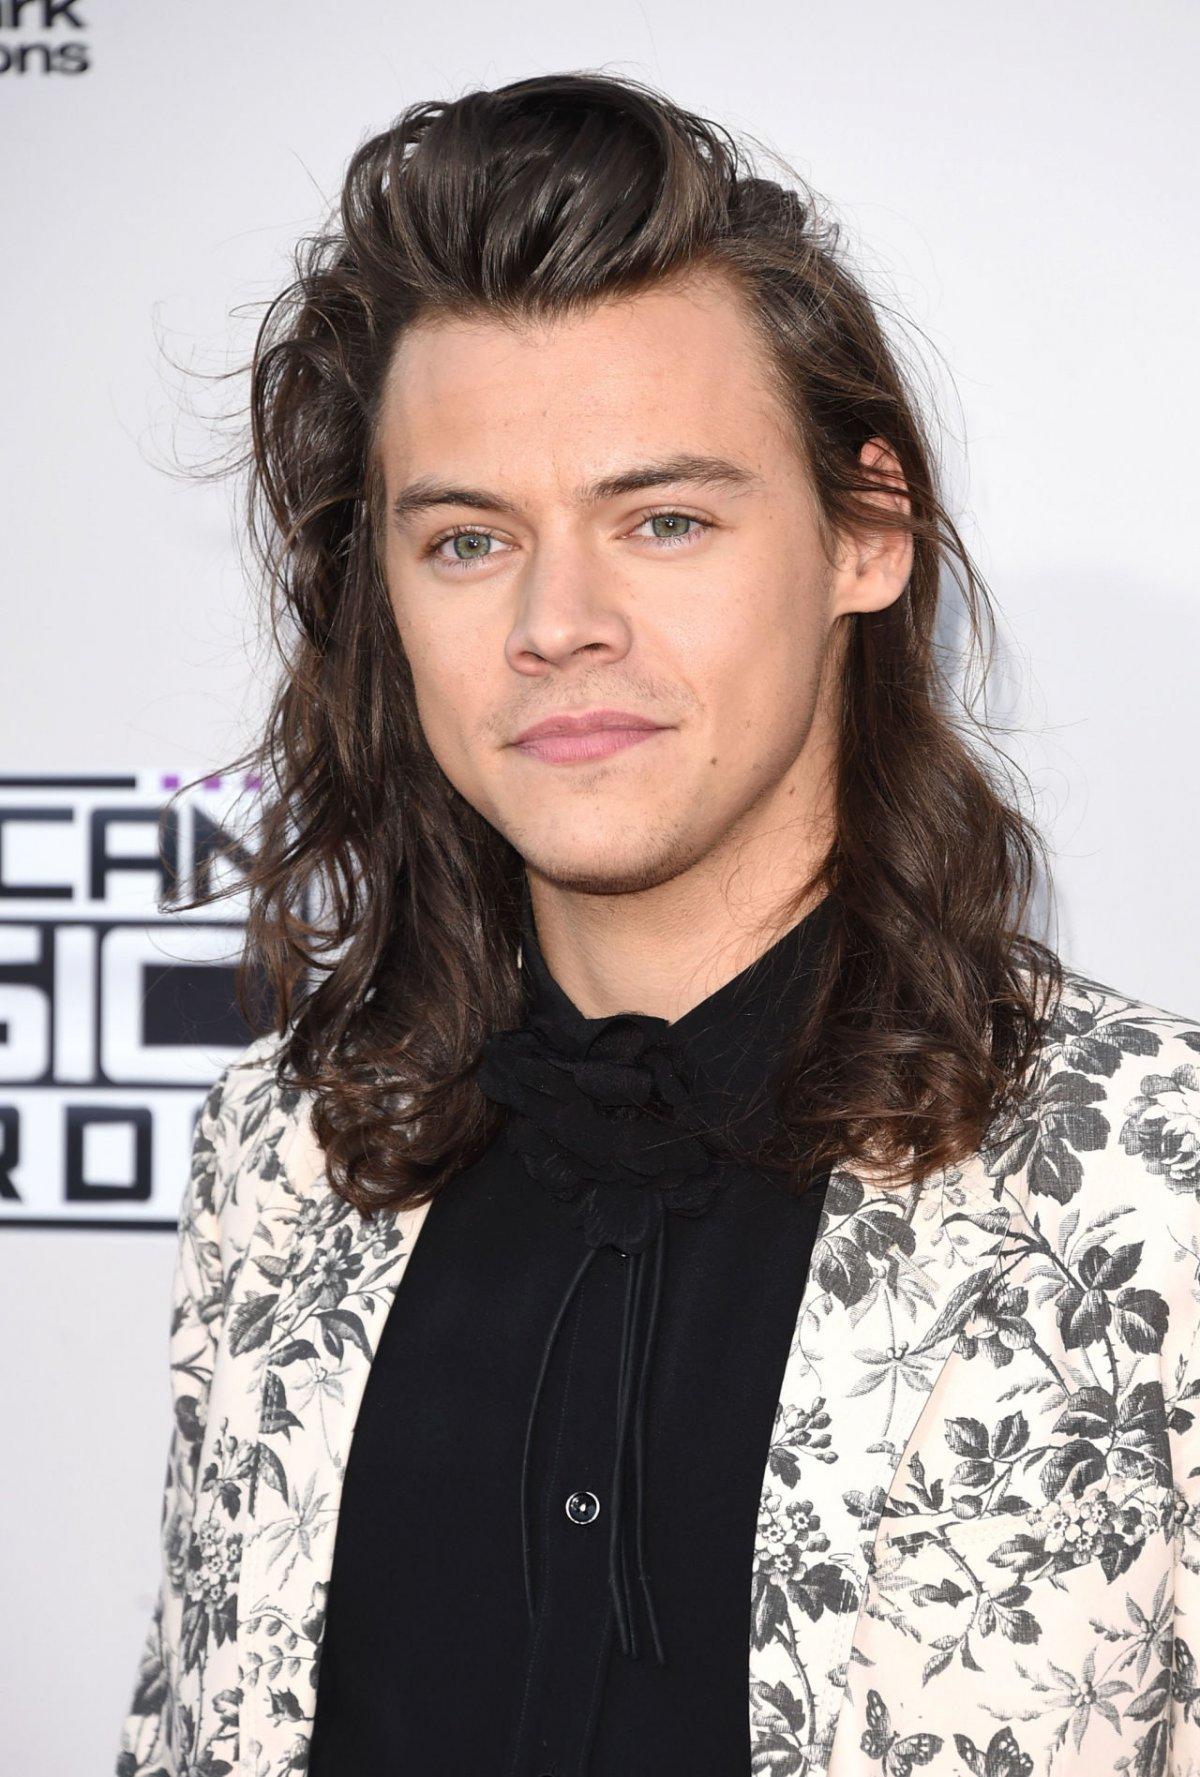 Reports: Harry Styles won't play Prince Eric in 'Little Mermaid